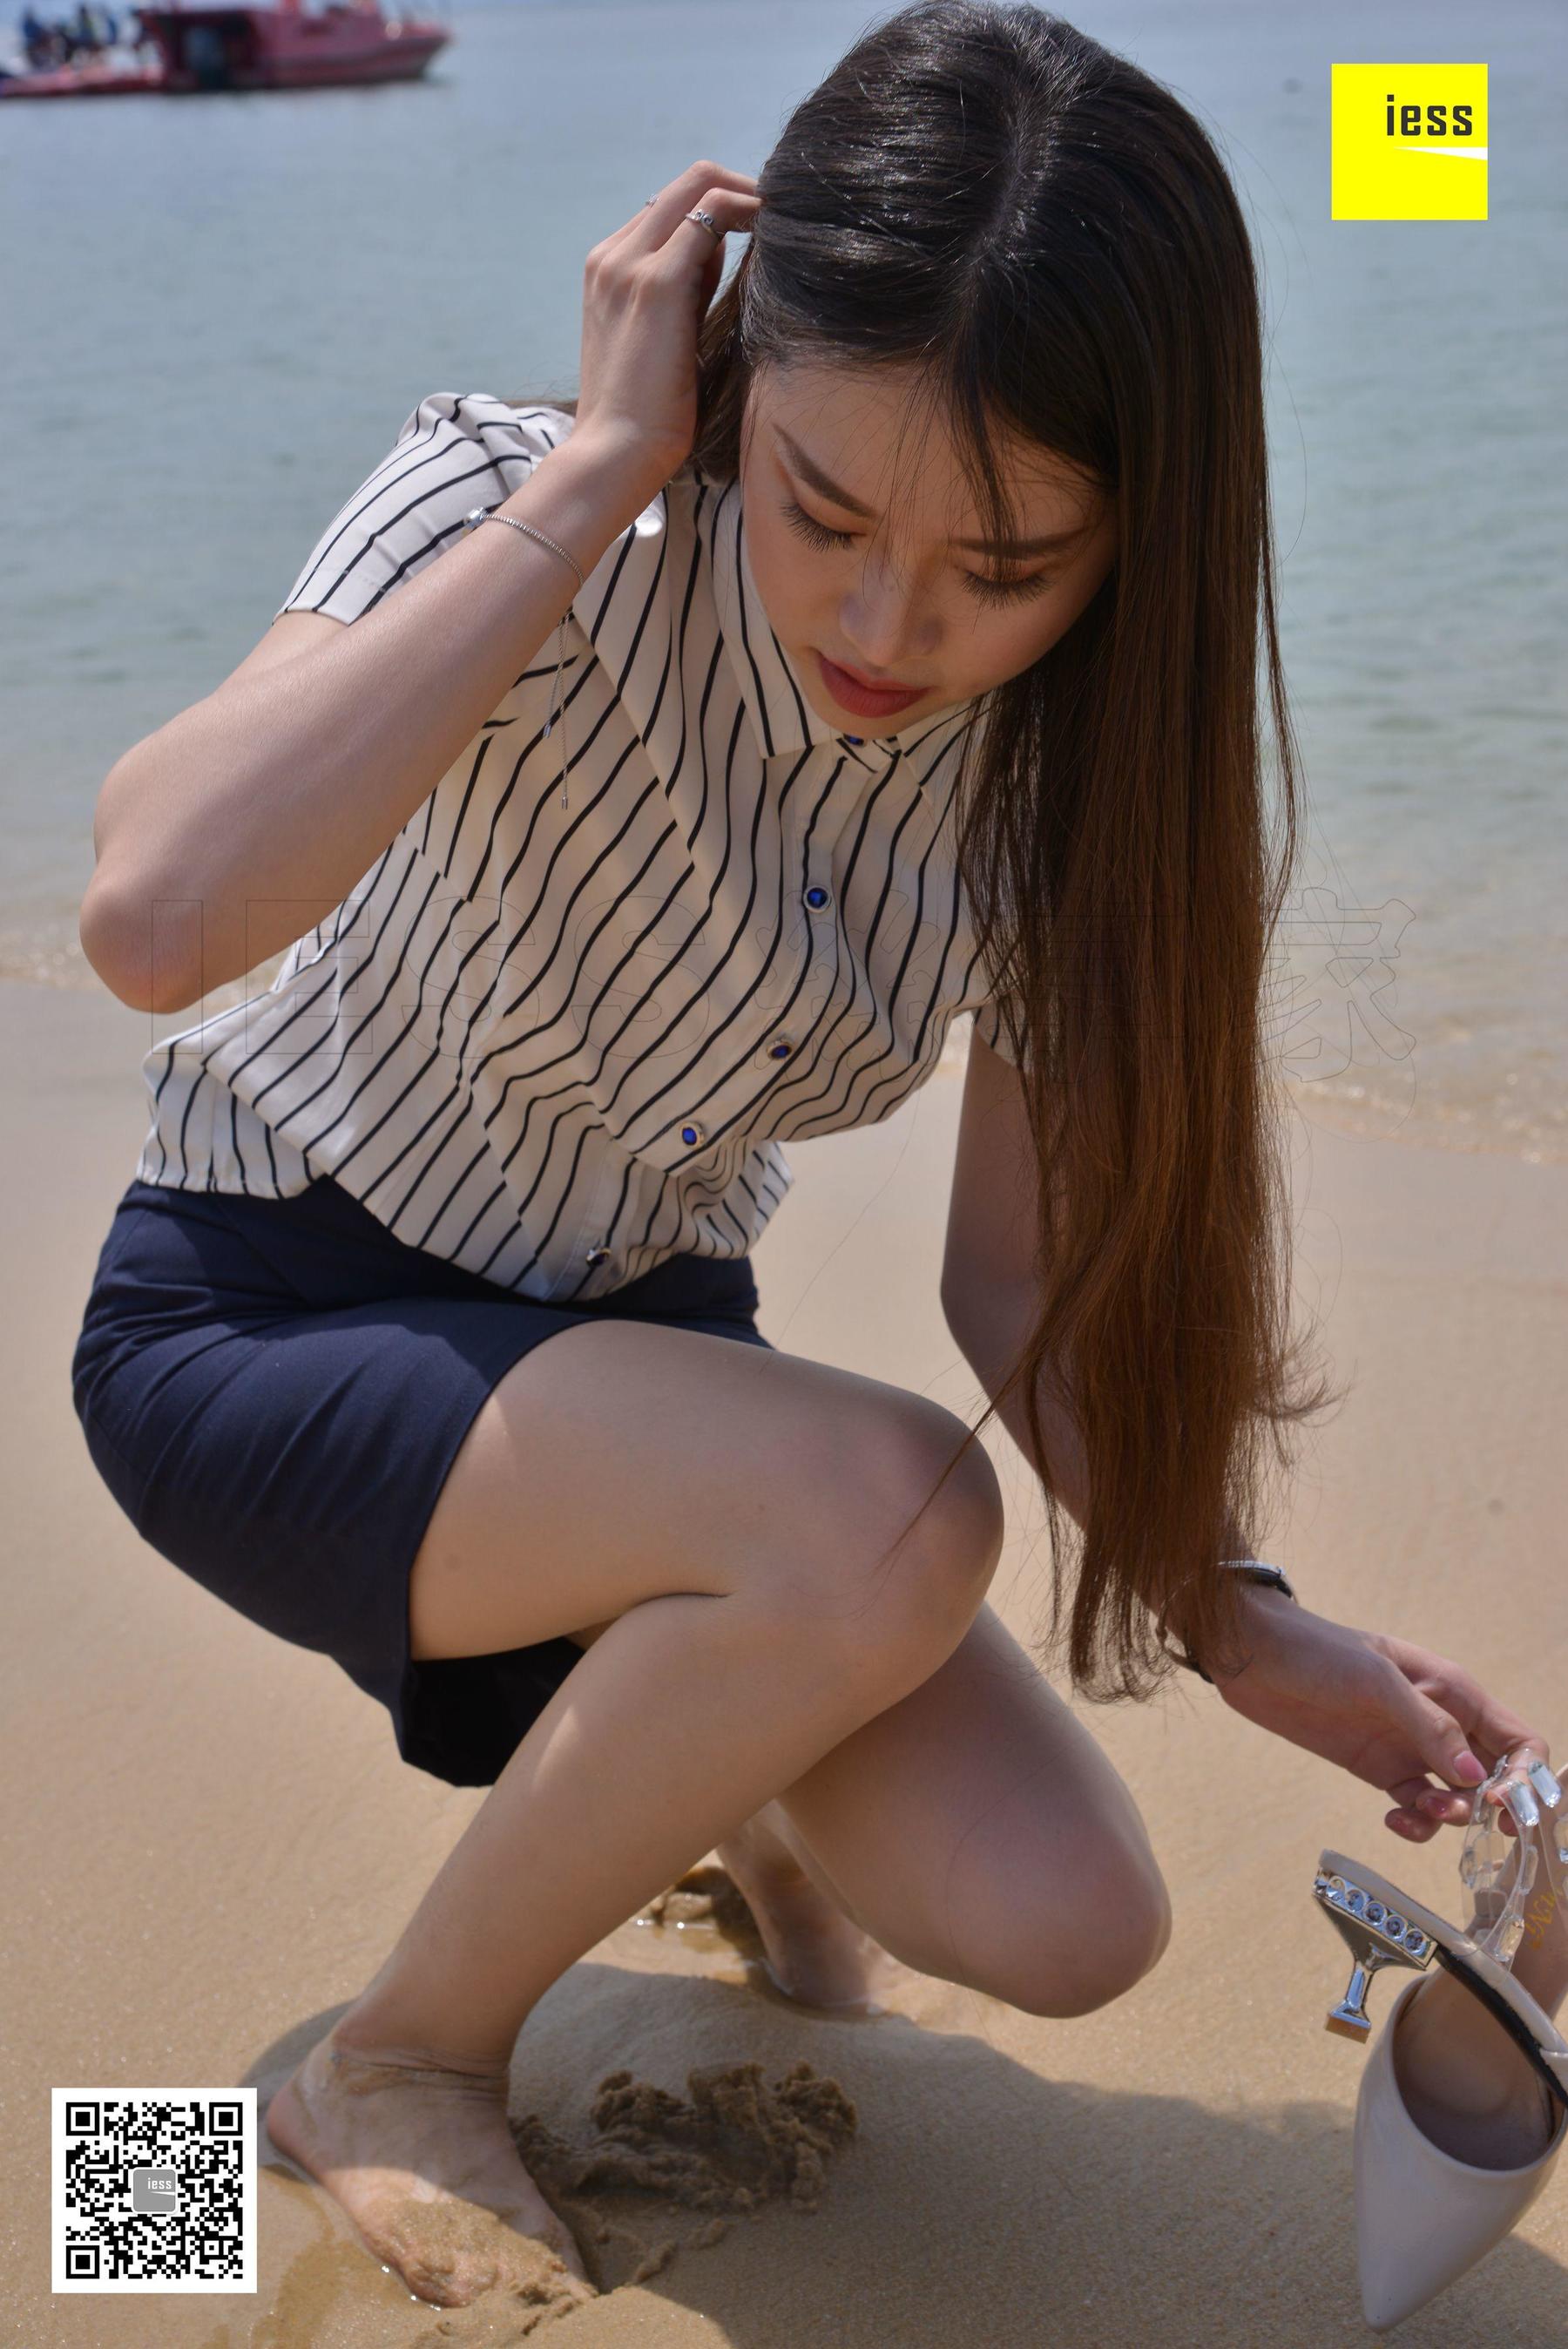 Jia Jia "Beach Uniform·Sixiang Jia" [Iss Quxiang IESS] "Devil Wednesday" Special Issue 26 Page 60 No.48d624